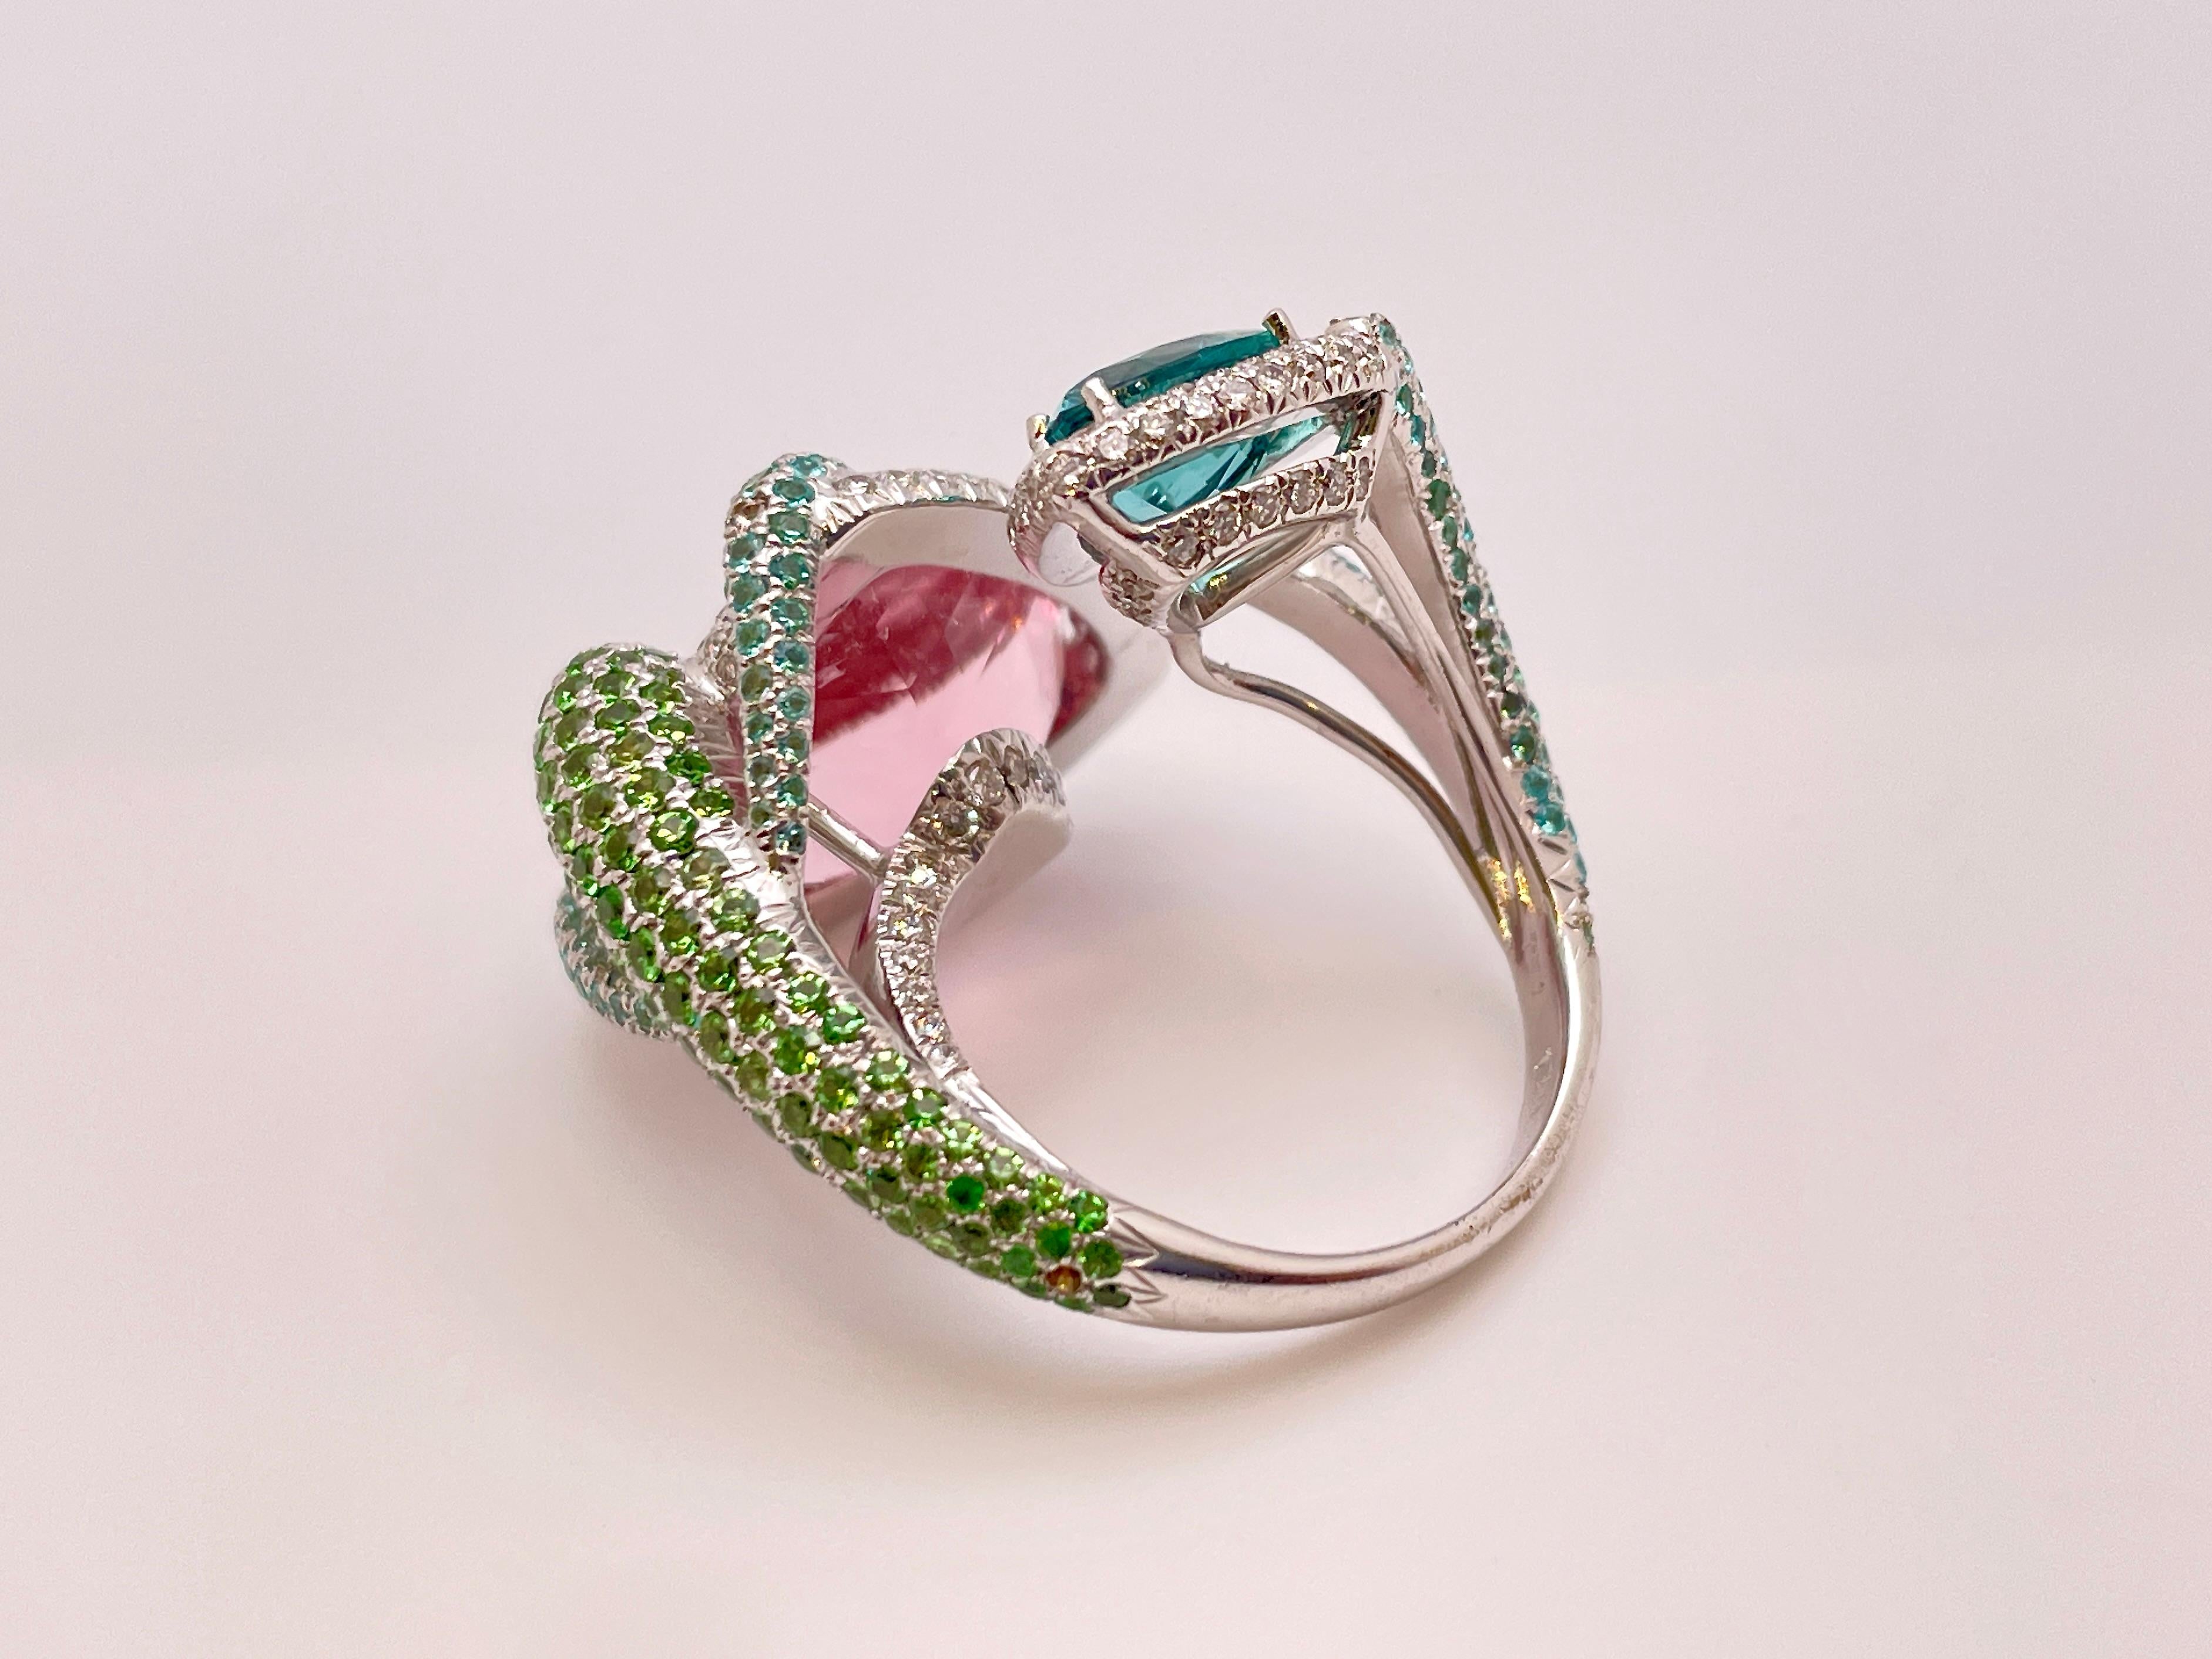 An original 18K white gold Avakian signed diamond tsavorite and tourmaline cocktail snake ring. Centered with one approximately 10.00 CT triangular brilliant cut natural pink tourmaline measuring approximately 14.50 x 14.50 x 8.50 MM, and one